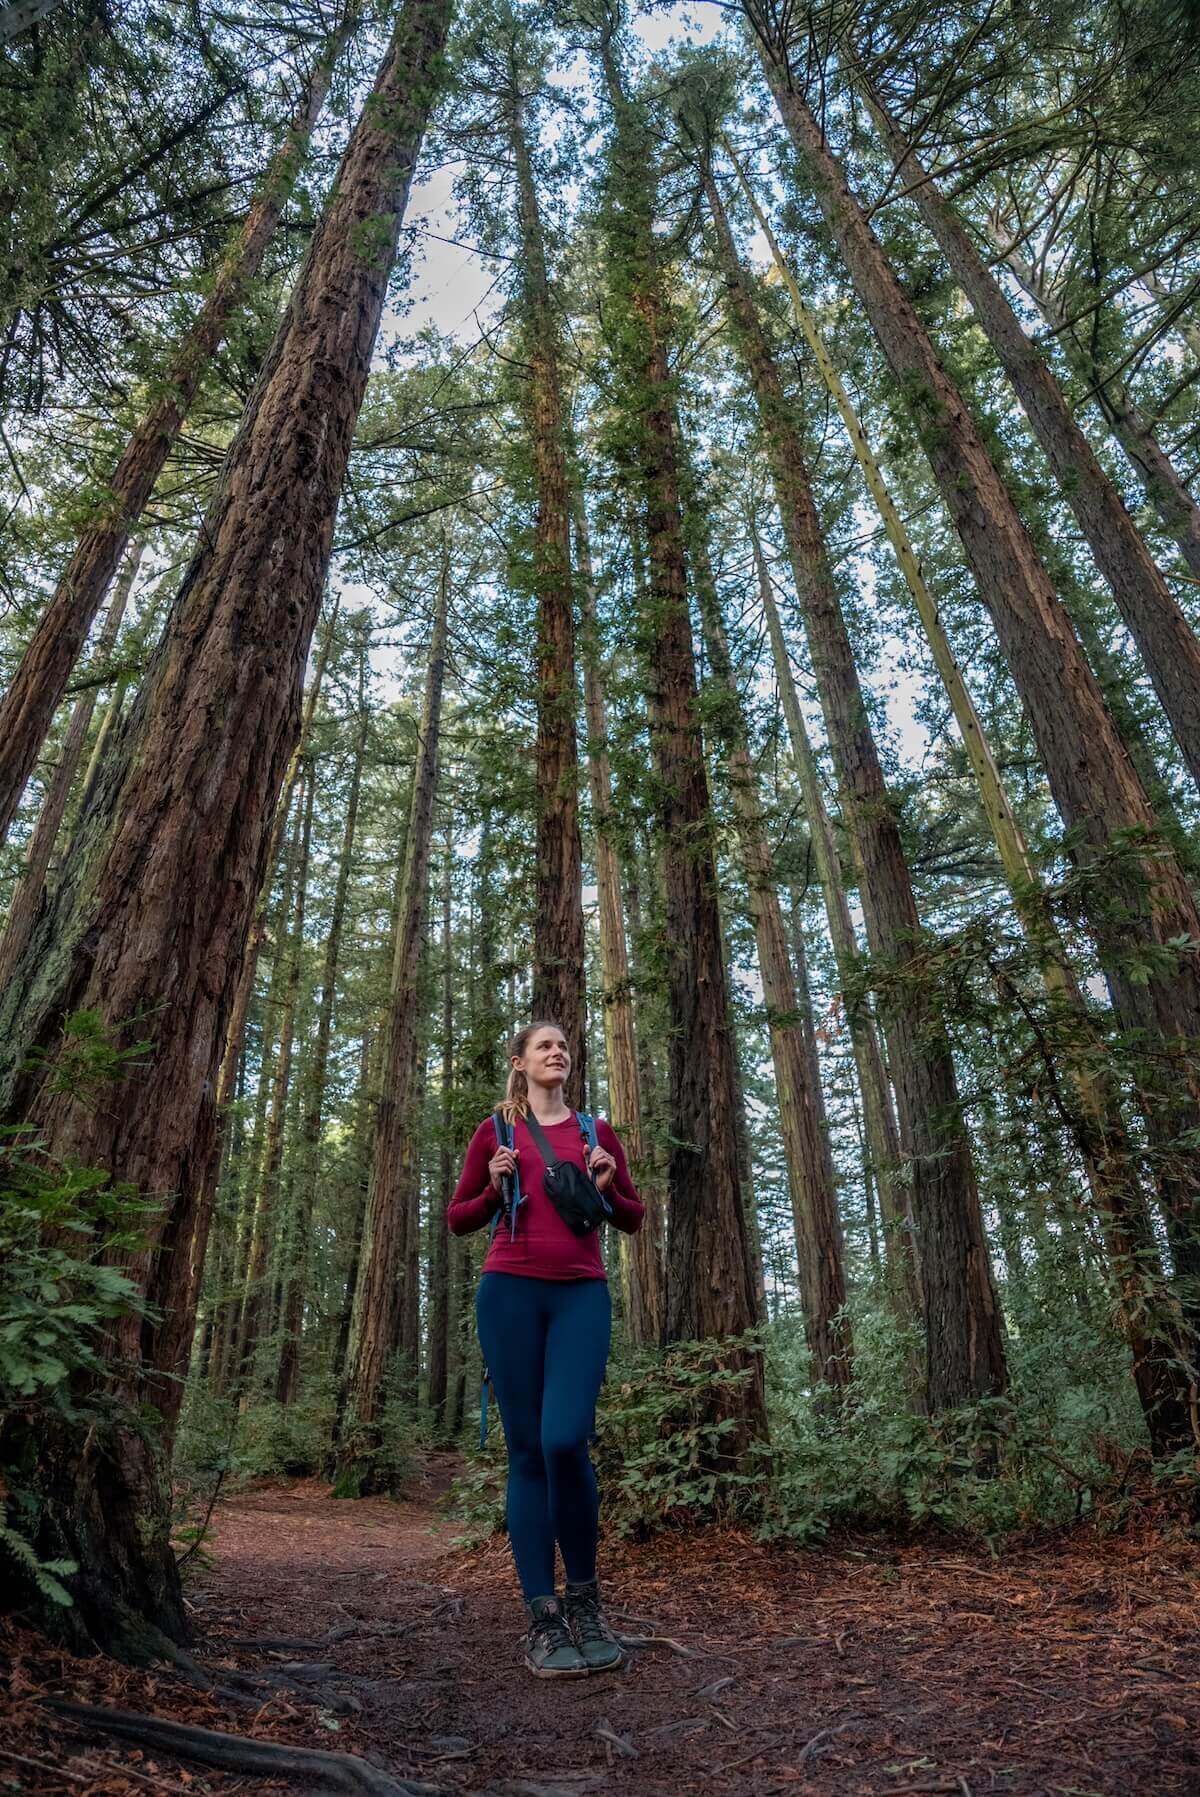 A female hiker stands amidst a dense grove of tall, thin, redwoods in Reinhardt Redwood Regional Park.